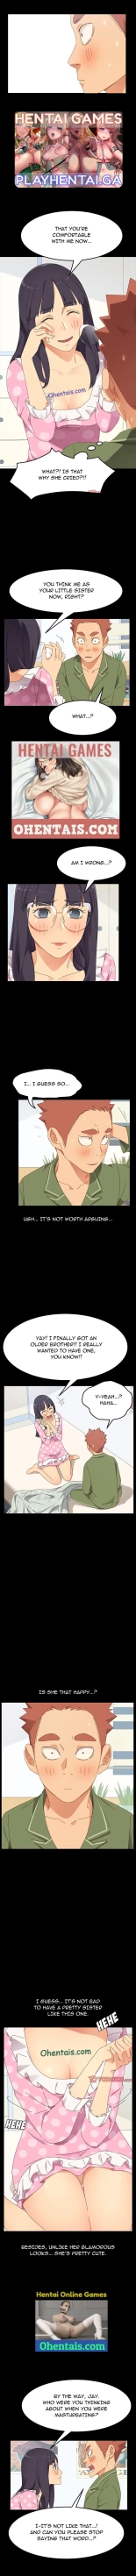 PERFECT ROOMMATES Ch. 3 : page 5